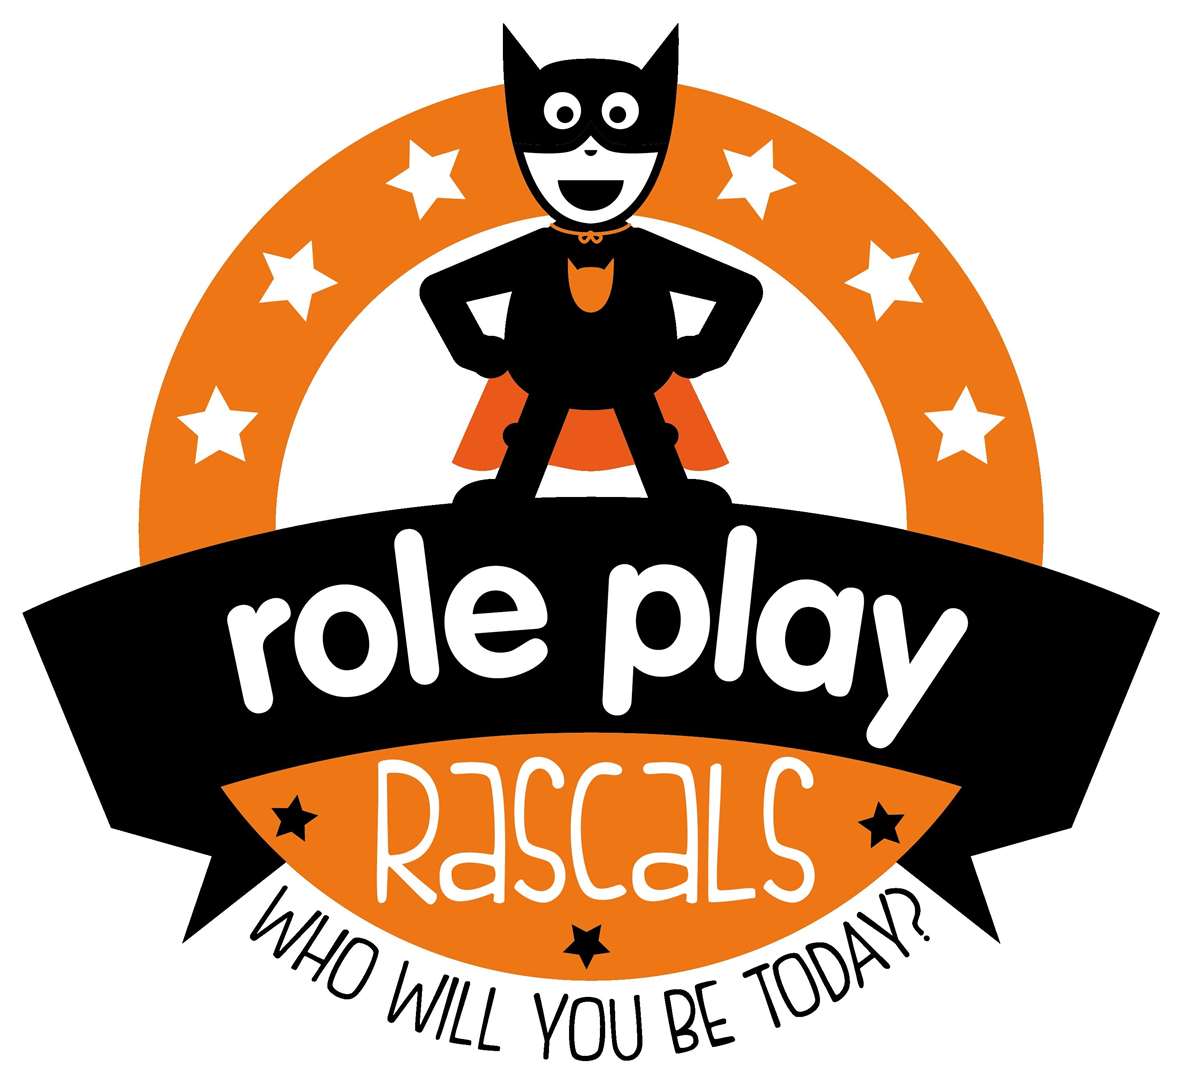 Role Play Rascals had hoped to welcome families from March 21